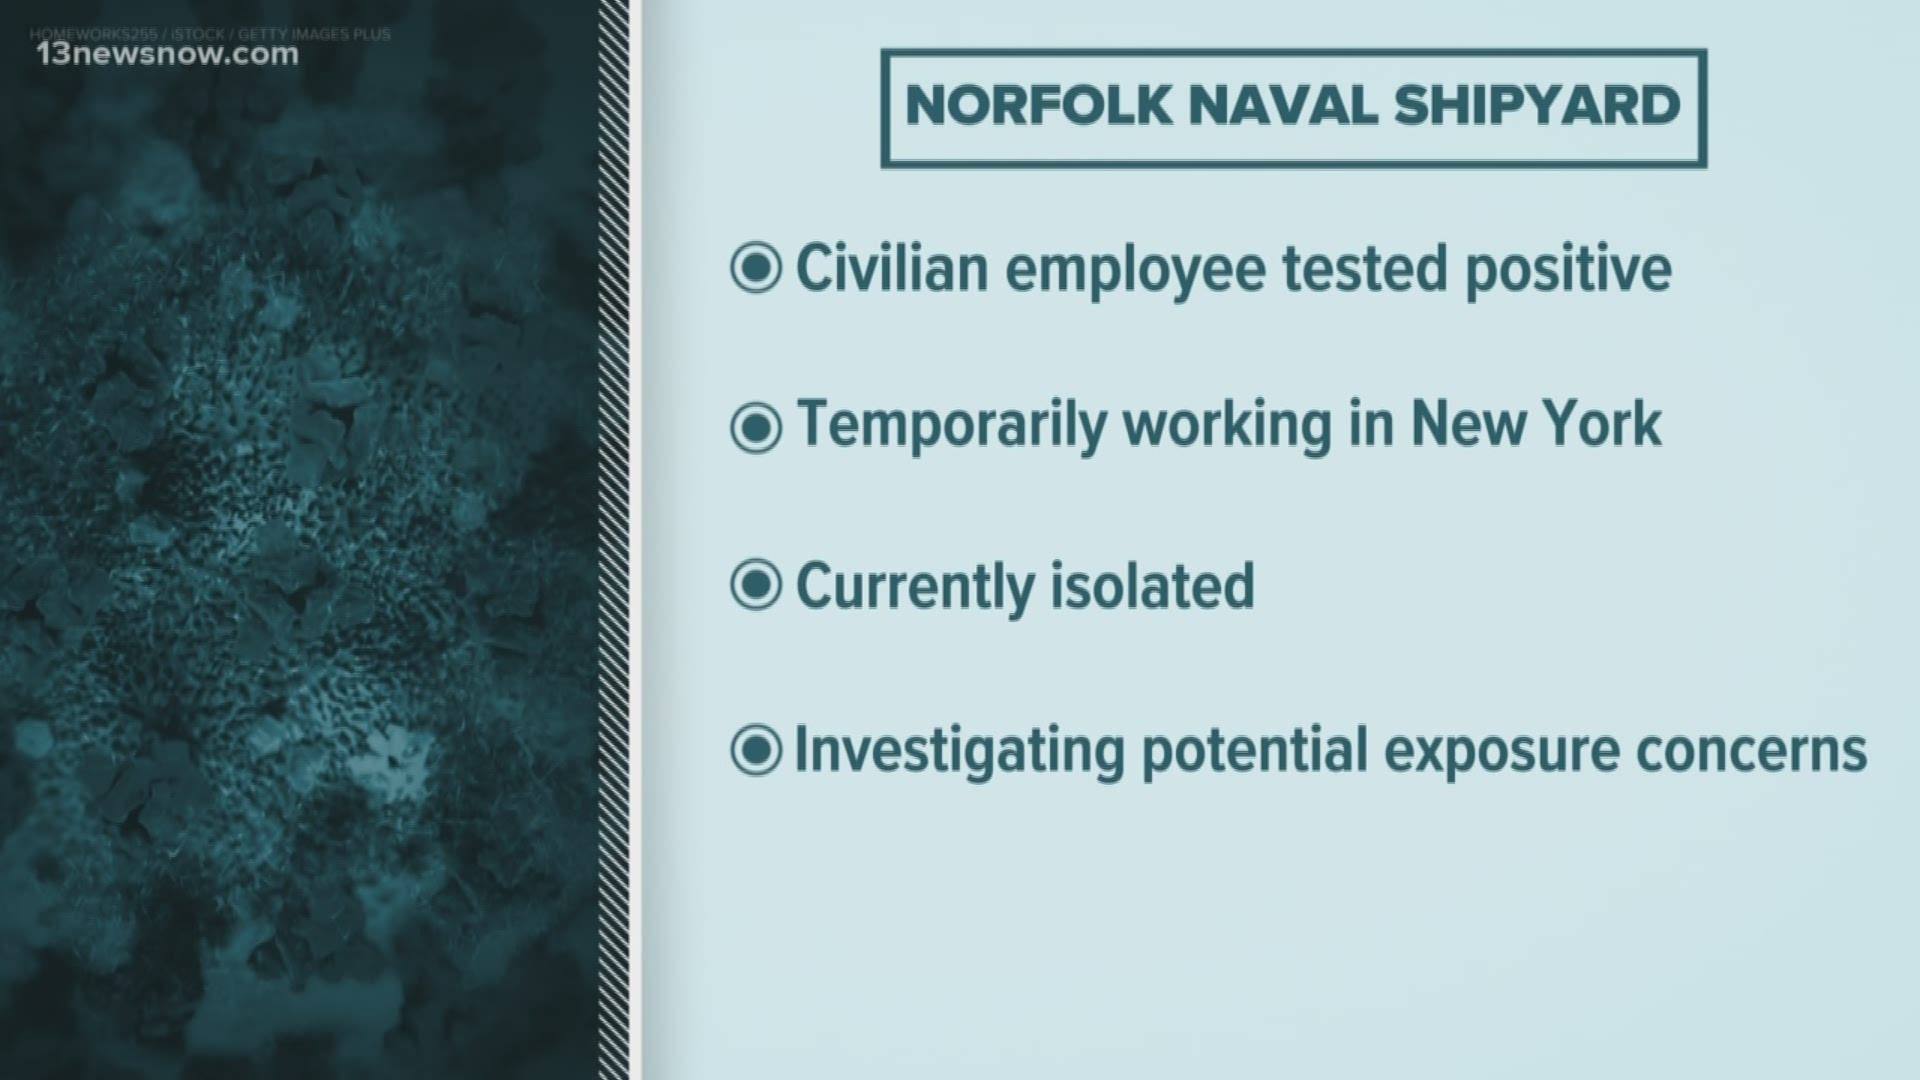 A civilian employee at Norfolk Naval Shipyard tested positive for COVID-19. The employee is in self-isolation.